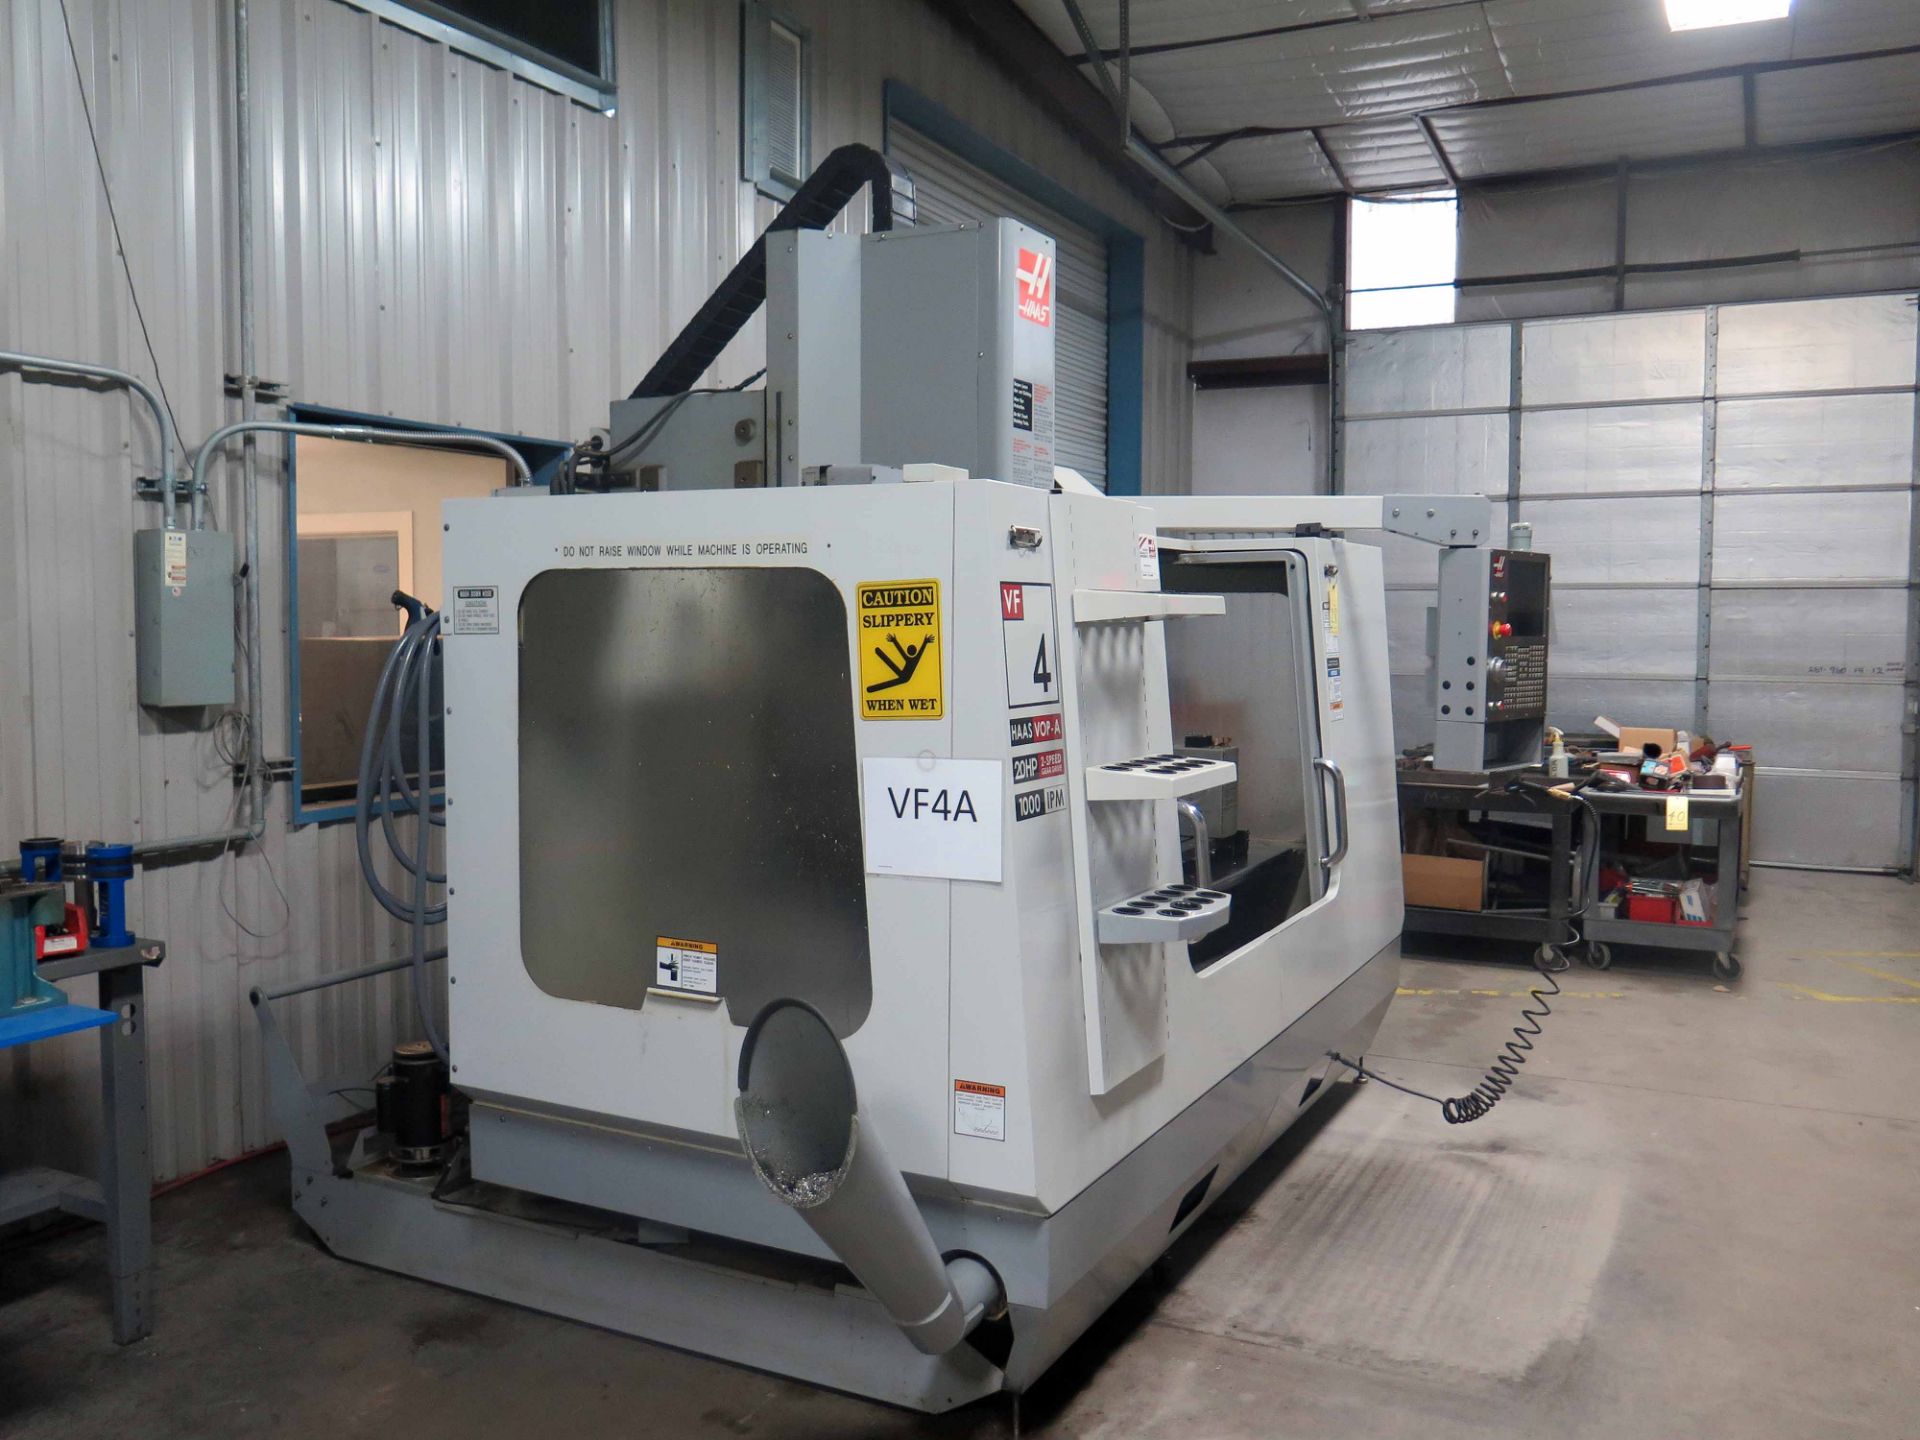 CNC VERTICAL MACHINING CENTER, HAAS MDL. VF-4B, new 2007, Haas V0P-A CNC control, 20 HP 2-spd. - Image 5 of 5